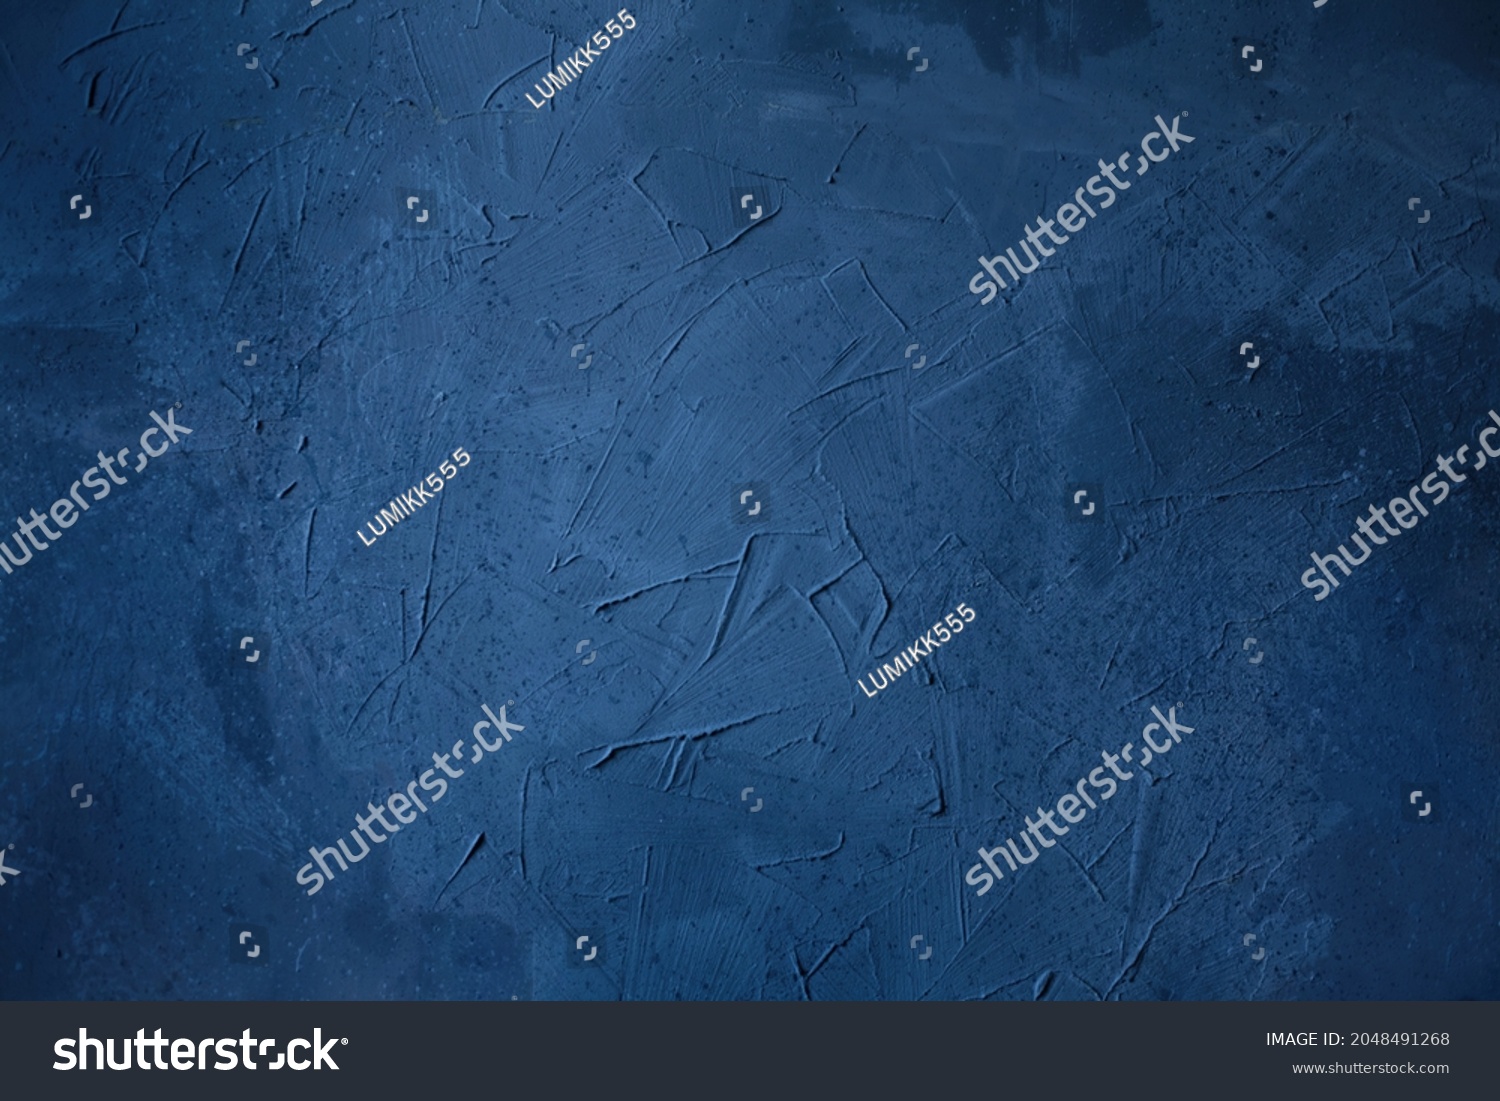 Abstract grunge blue navy Background, Texture. Beautiful empty stucco wall. Textured rough dark blue Surface. Creative Web banner or Wallpaper With Copy Space #2048491268